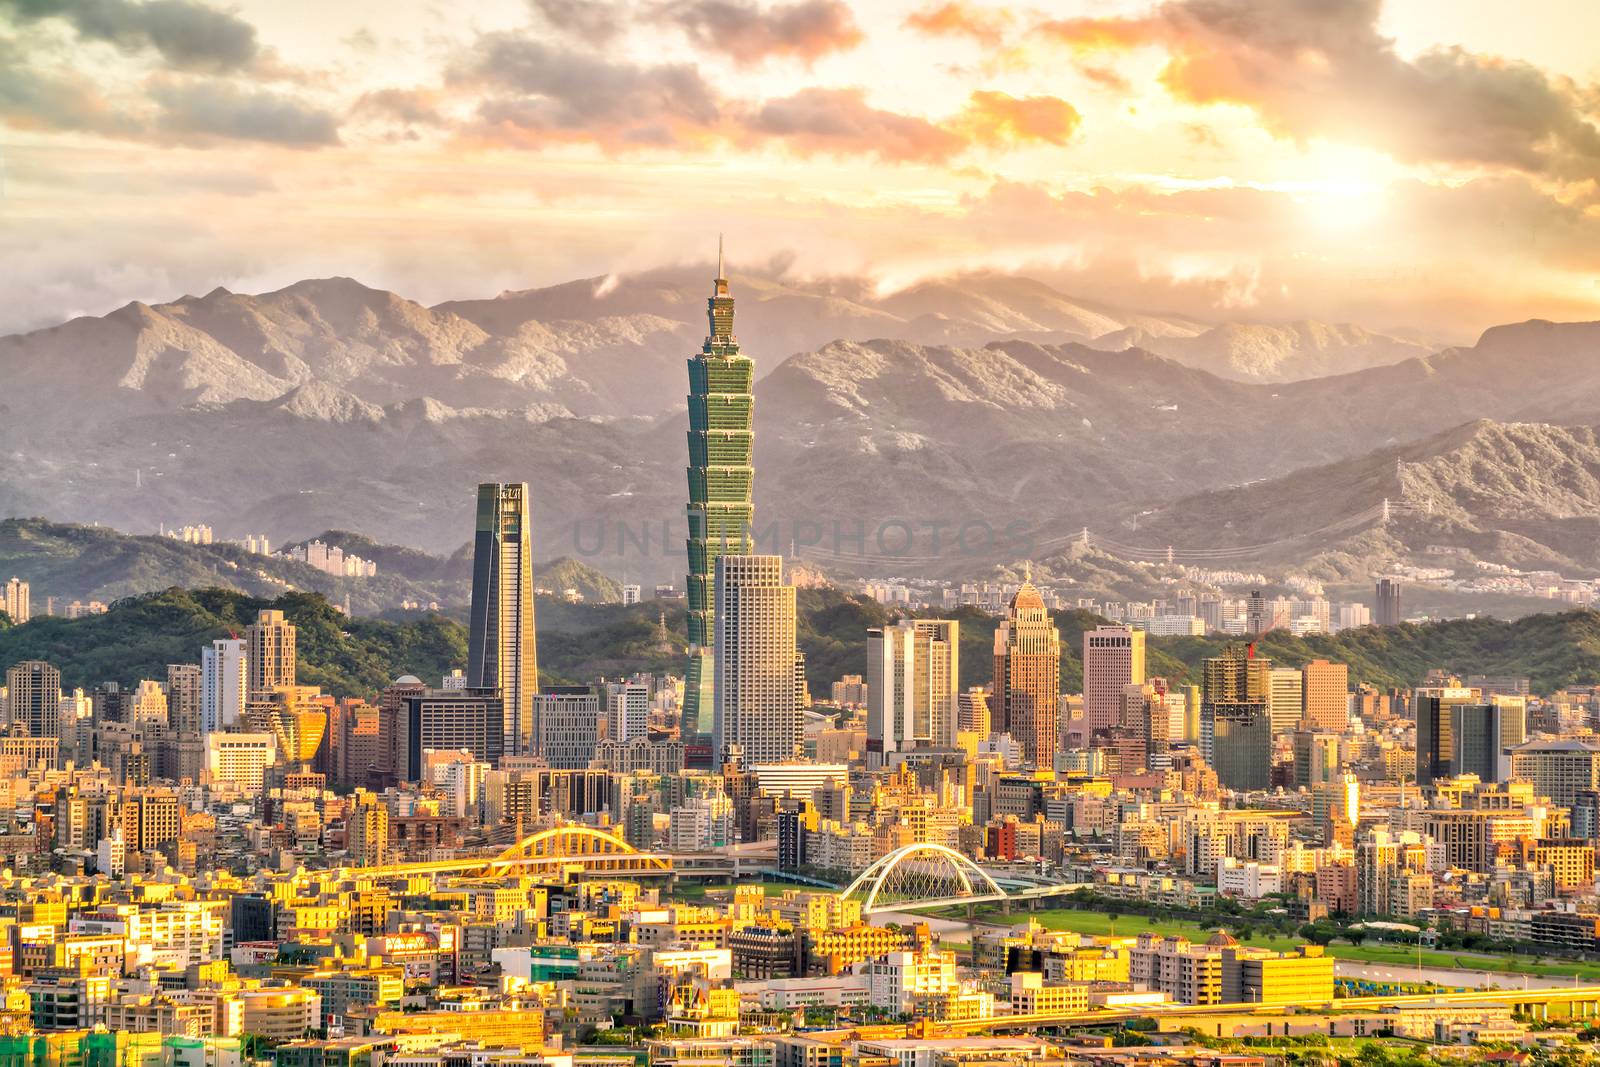 Taipei city skyline landscape at sunset time in Taiwan